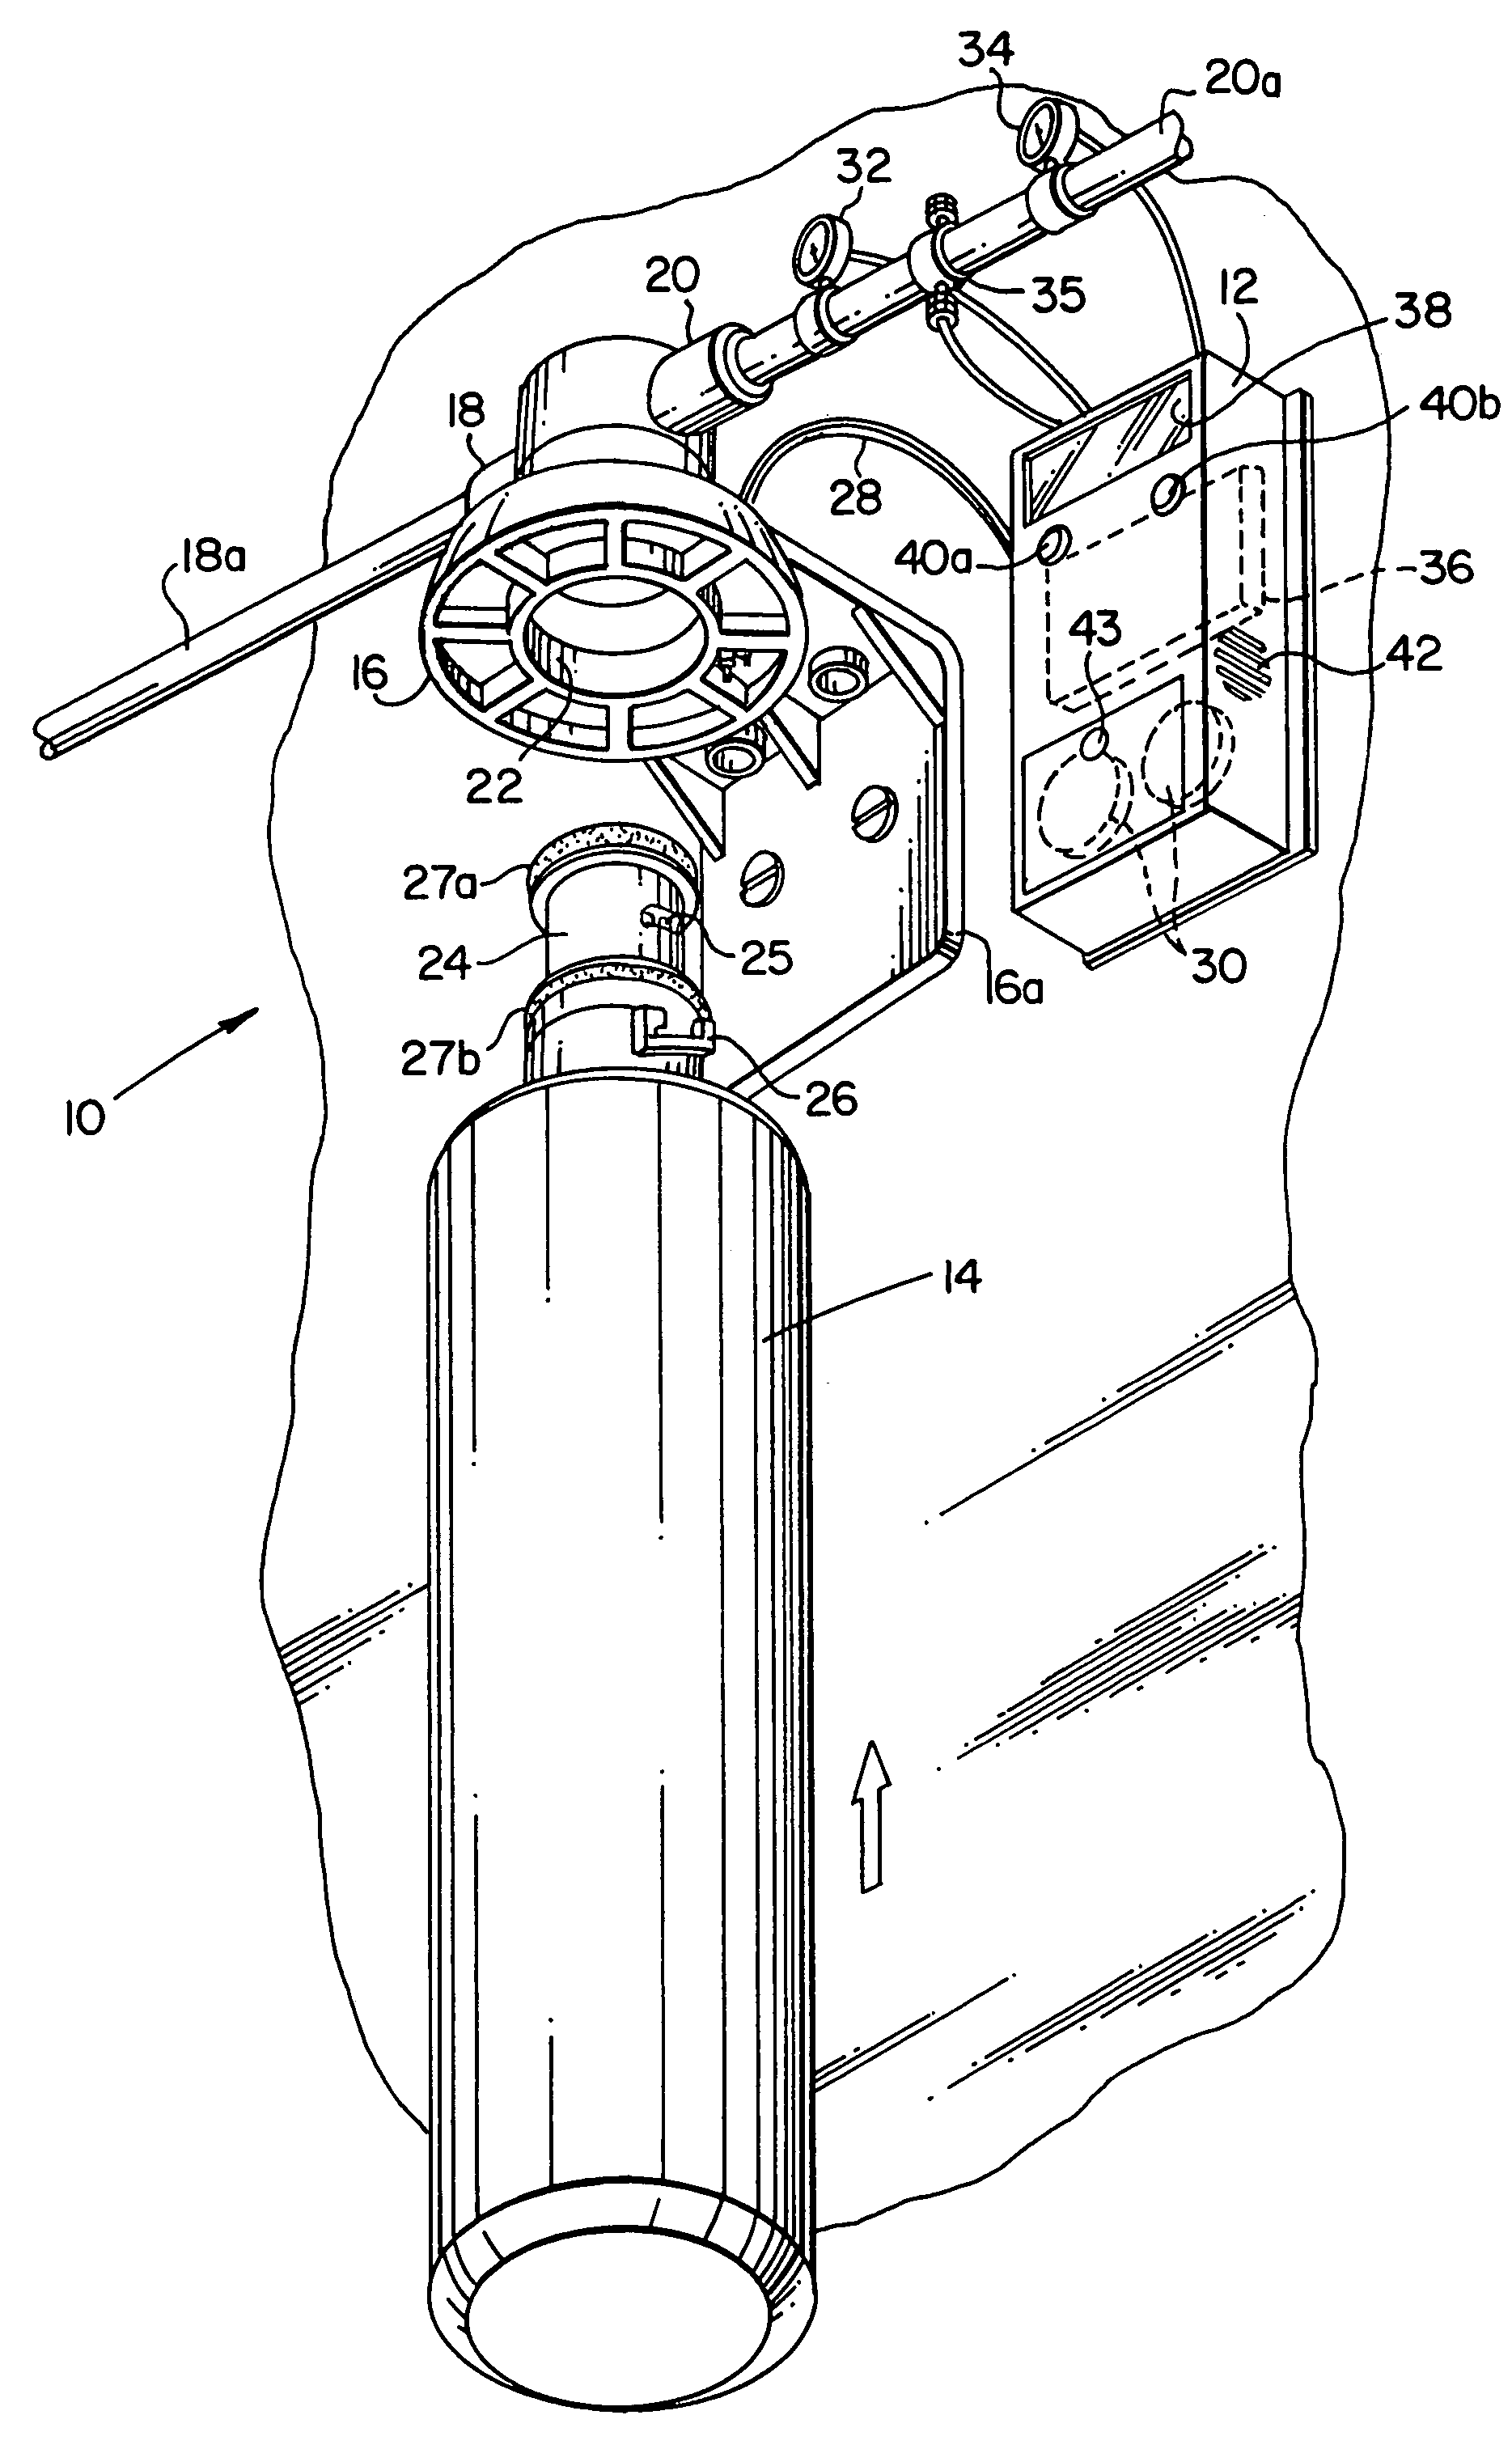 System for monitoring the performance of fluid treatment cartridges